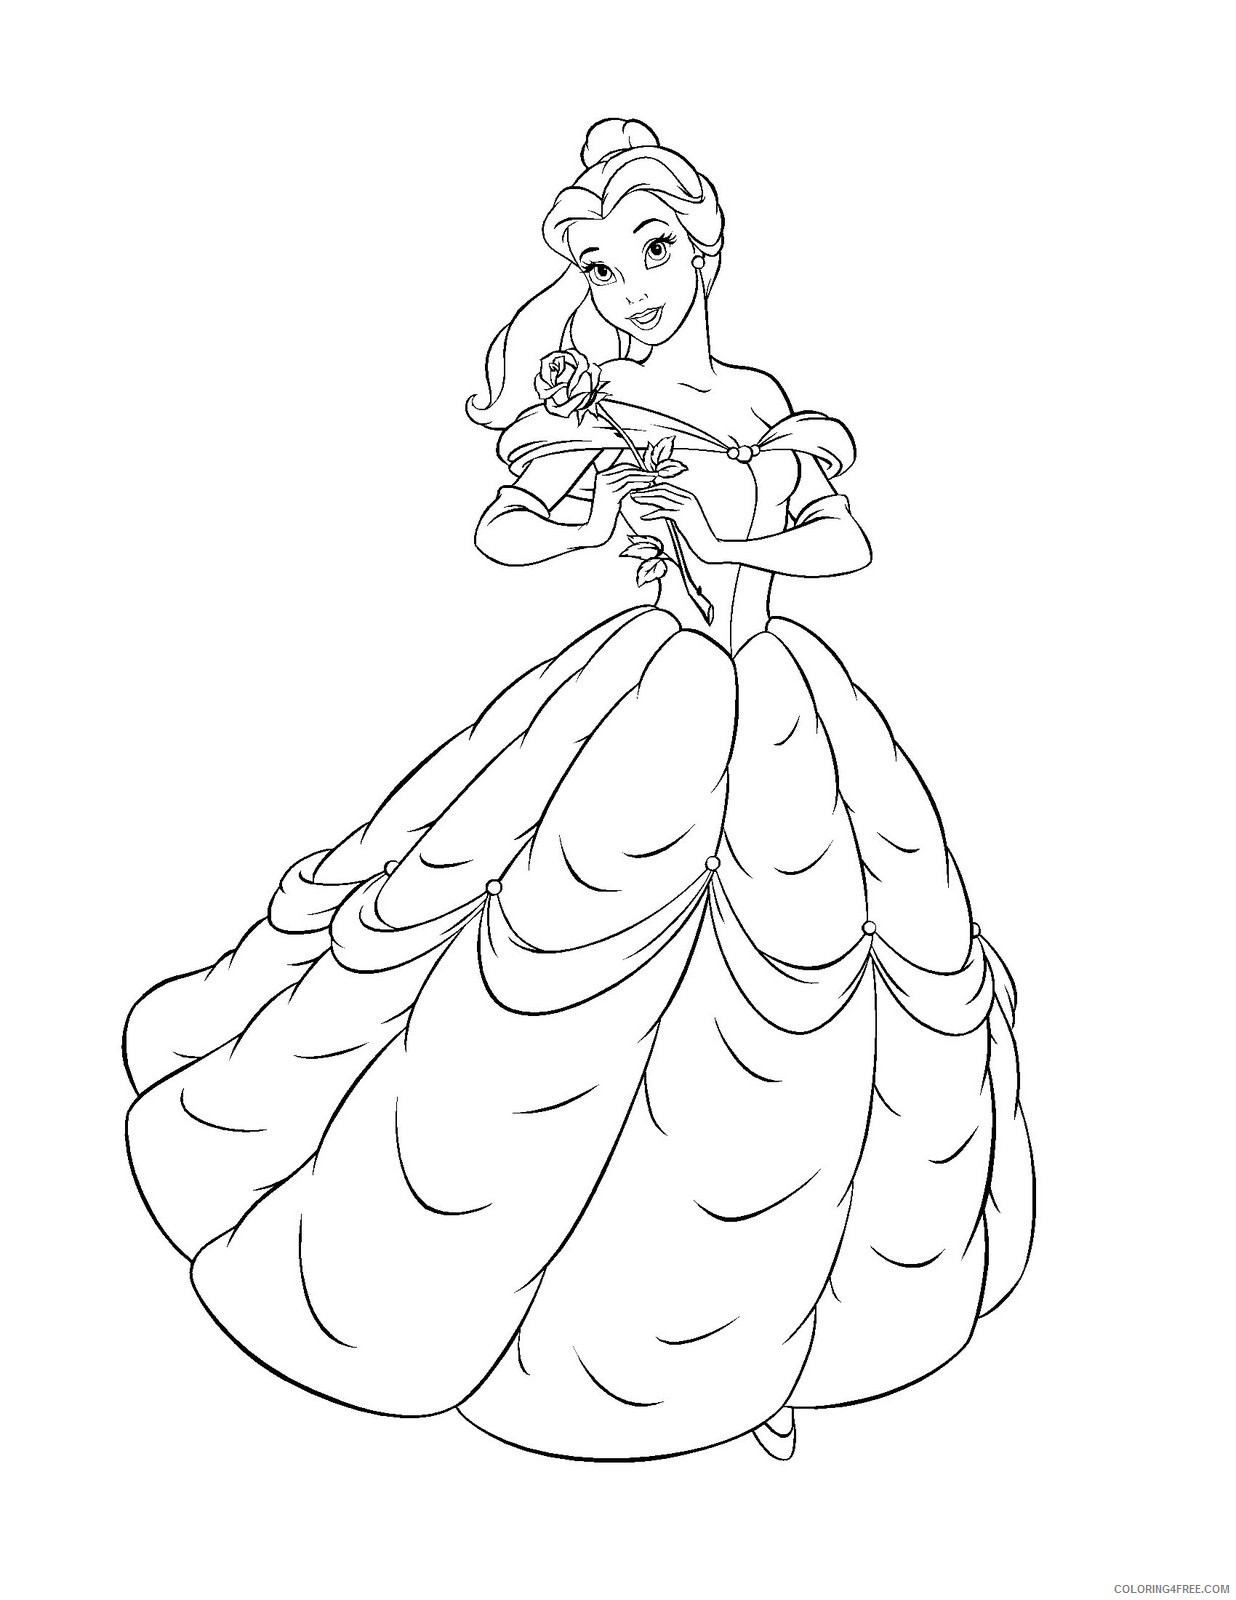 Princess Belle Coloring Pages Cartoons Belle Printable 2020 5104 Coloring4free